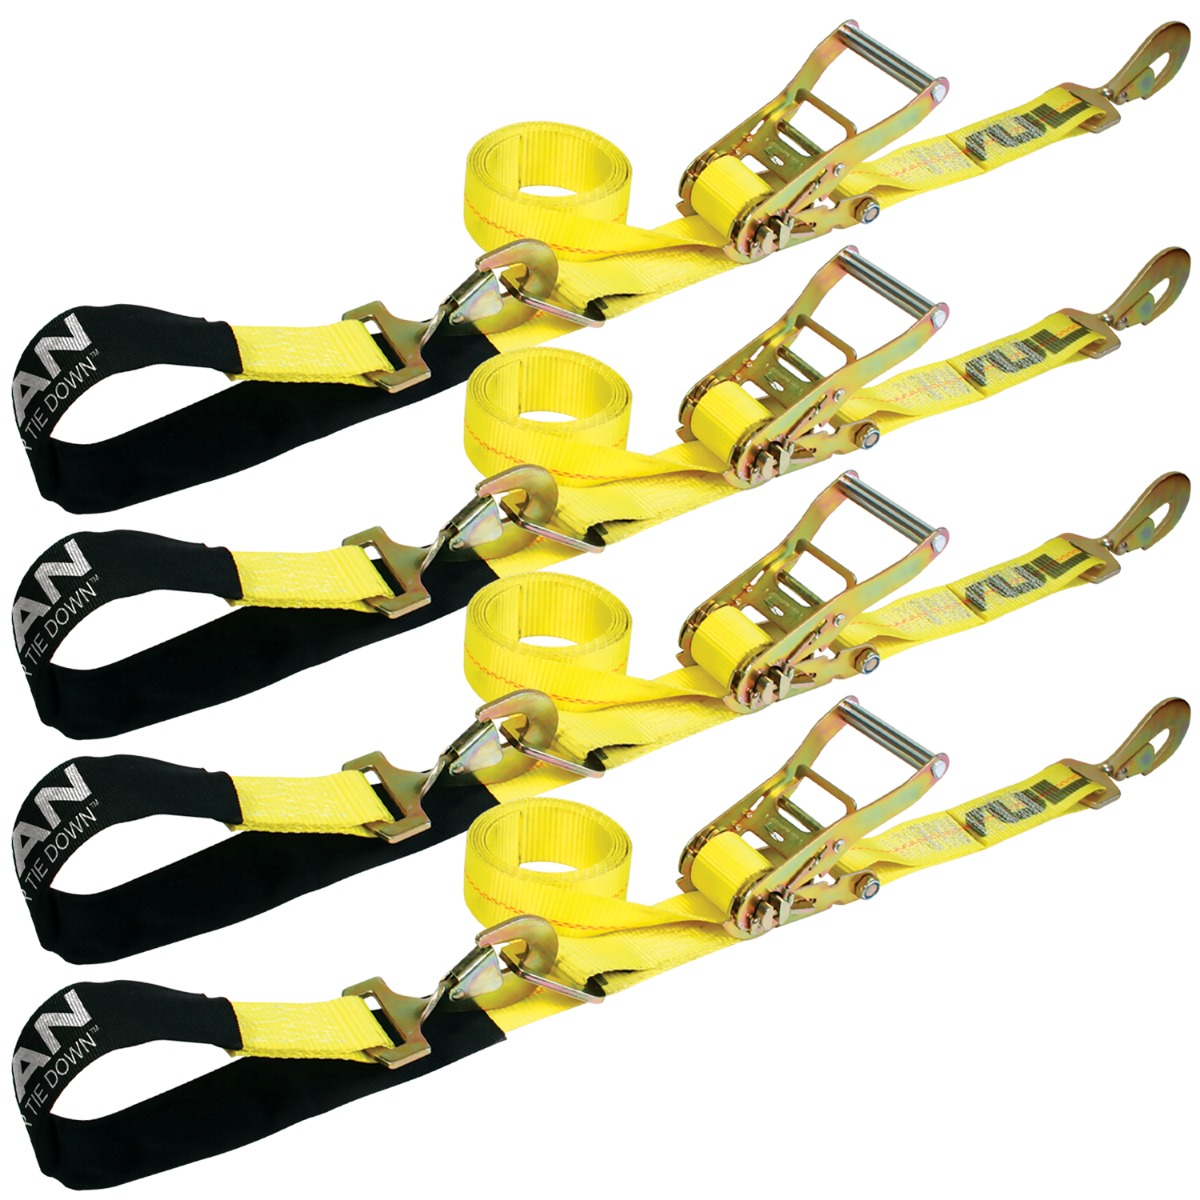 Vulcan Ultimate Axle Tie Down Kit - Classic Yellow - Includes (2) 22 inch Axle Straps, (2) 36 inch Axle Straps, (2) 96 inch Snap Hook Ratchet Straps